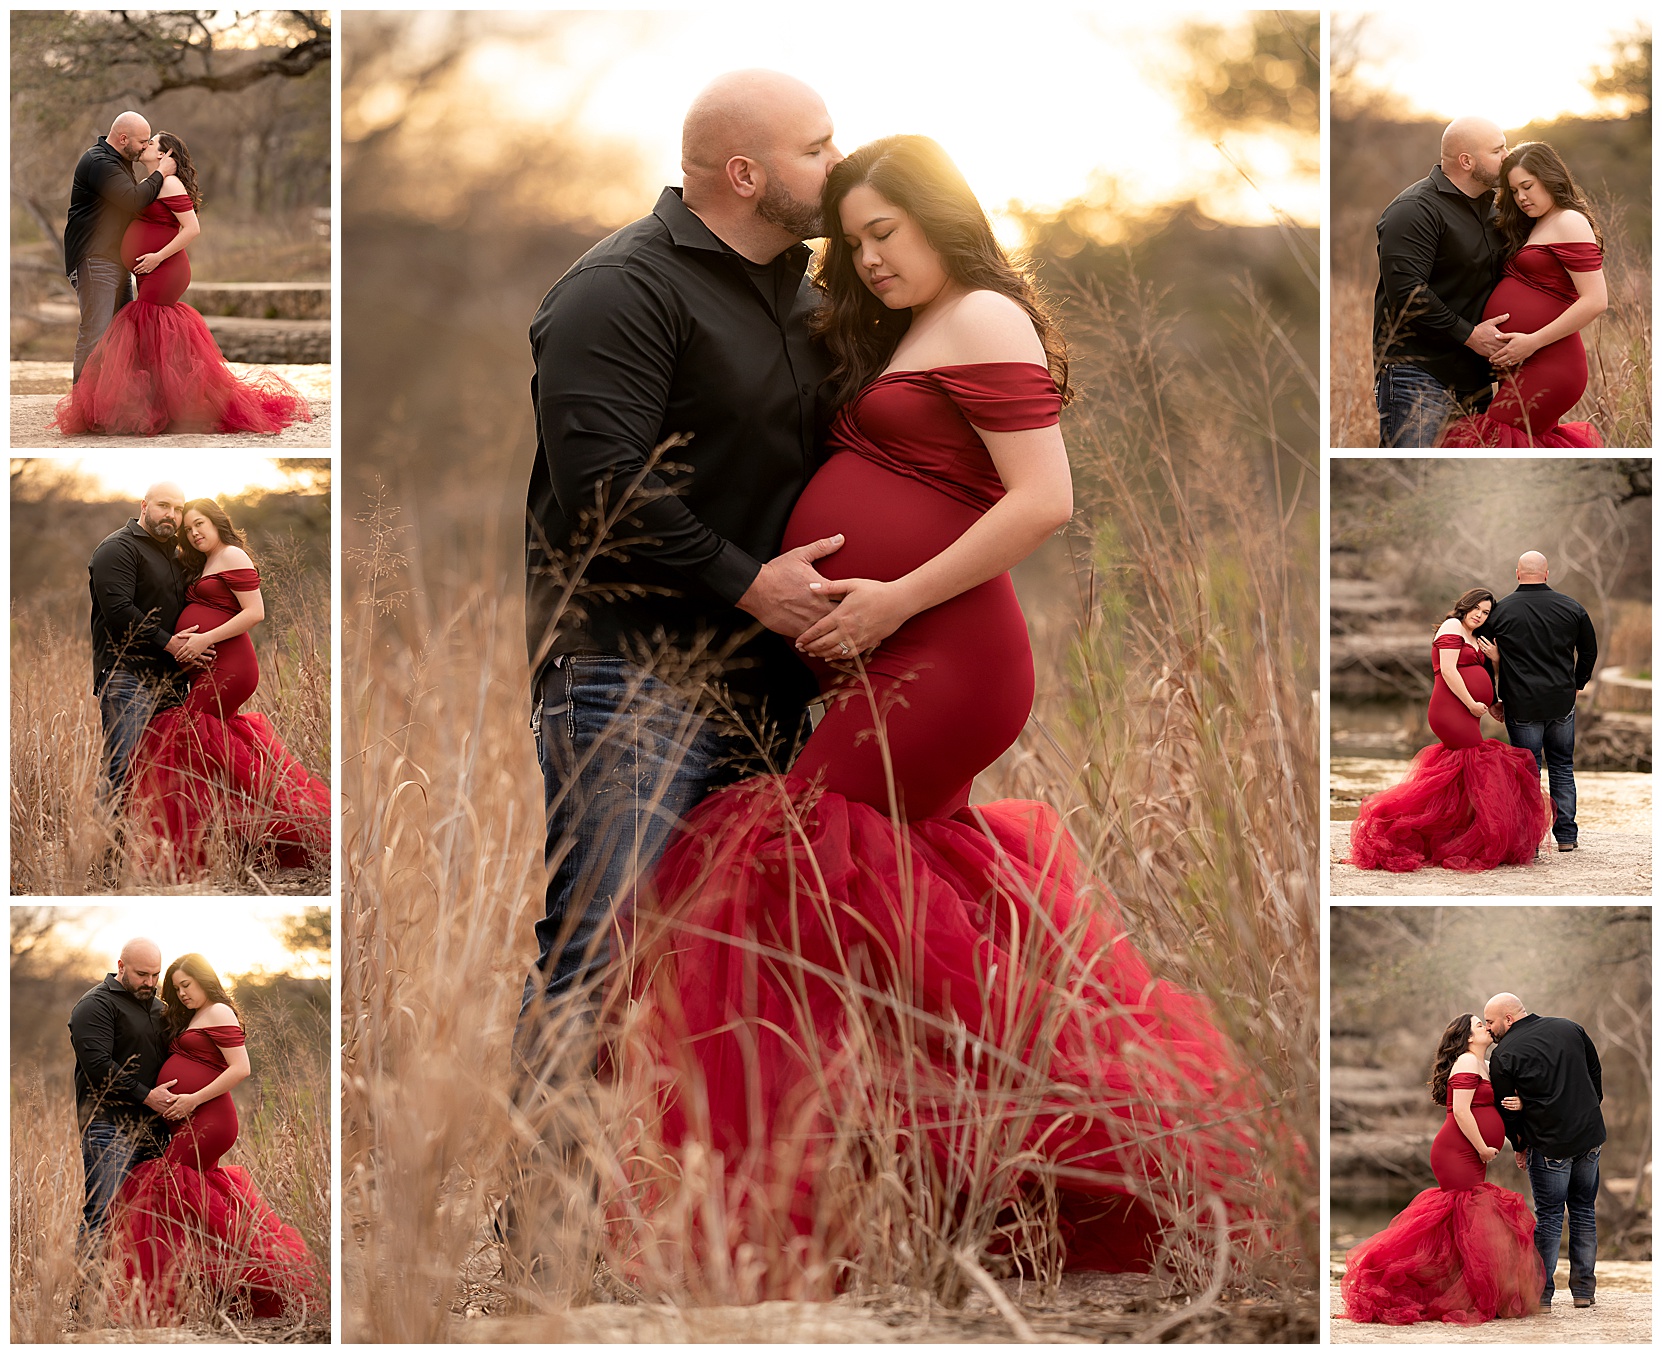 Outdoor maternity photo collage with a pregnant woman in a red maternity gown and her partner in a black button-up shirt. They are set against a Texas shrubscape background.